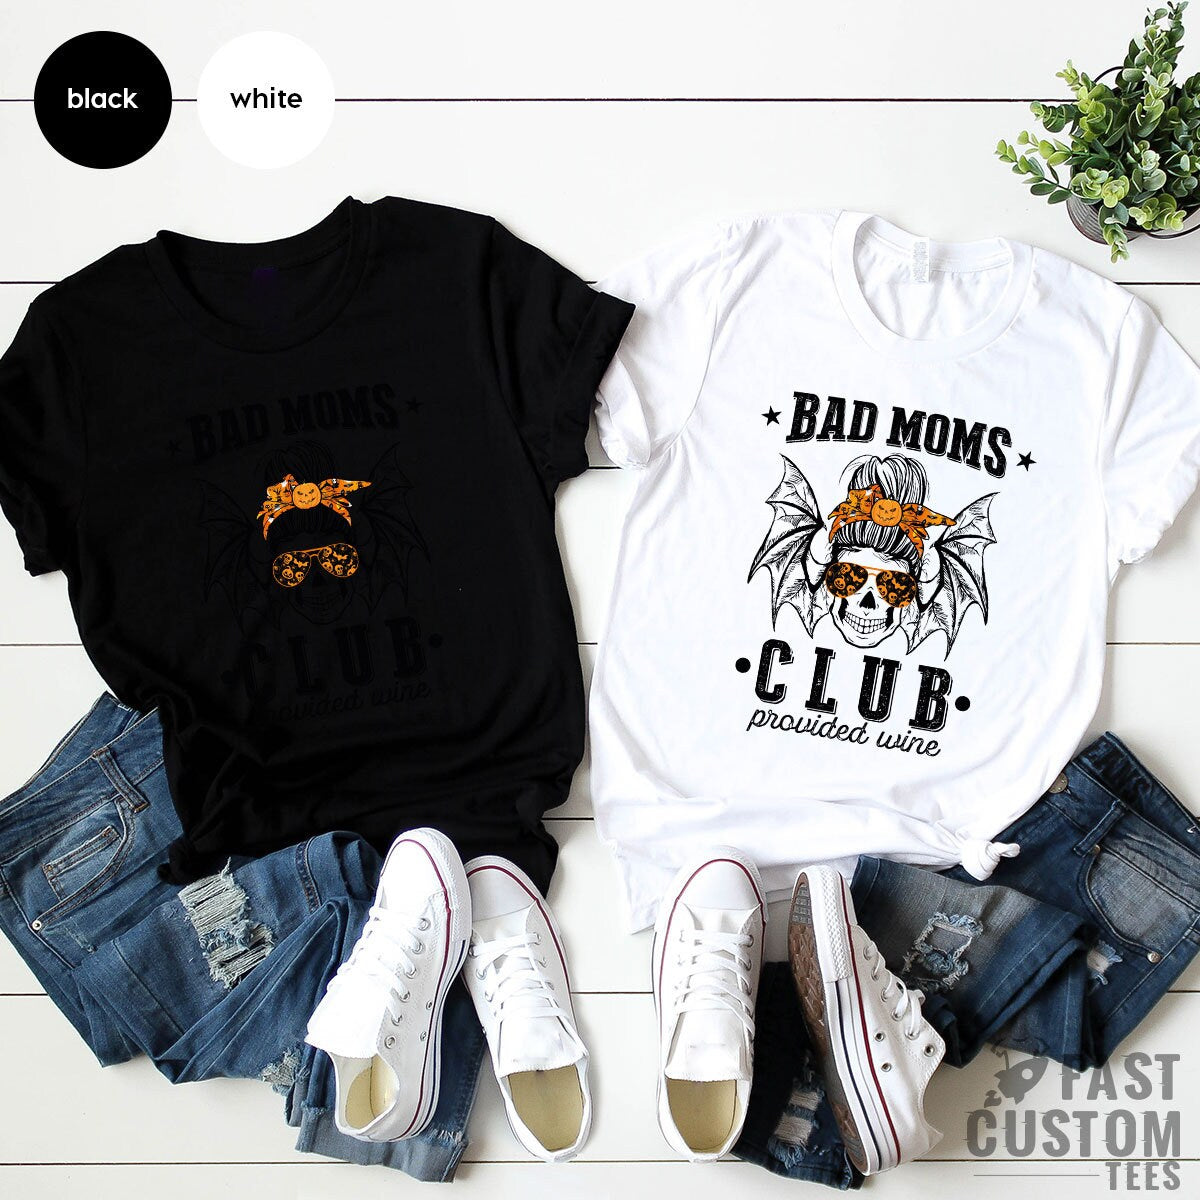 Funny Mom Shirt, Mothers Day Shirt, Gift For Mama, Bad Moms Club Provided Wine T Shirt, Wine Lover Mom TShirt, New Mom Gifts - Fastdeliverytees.com